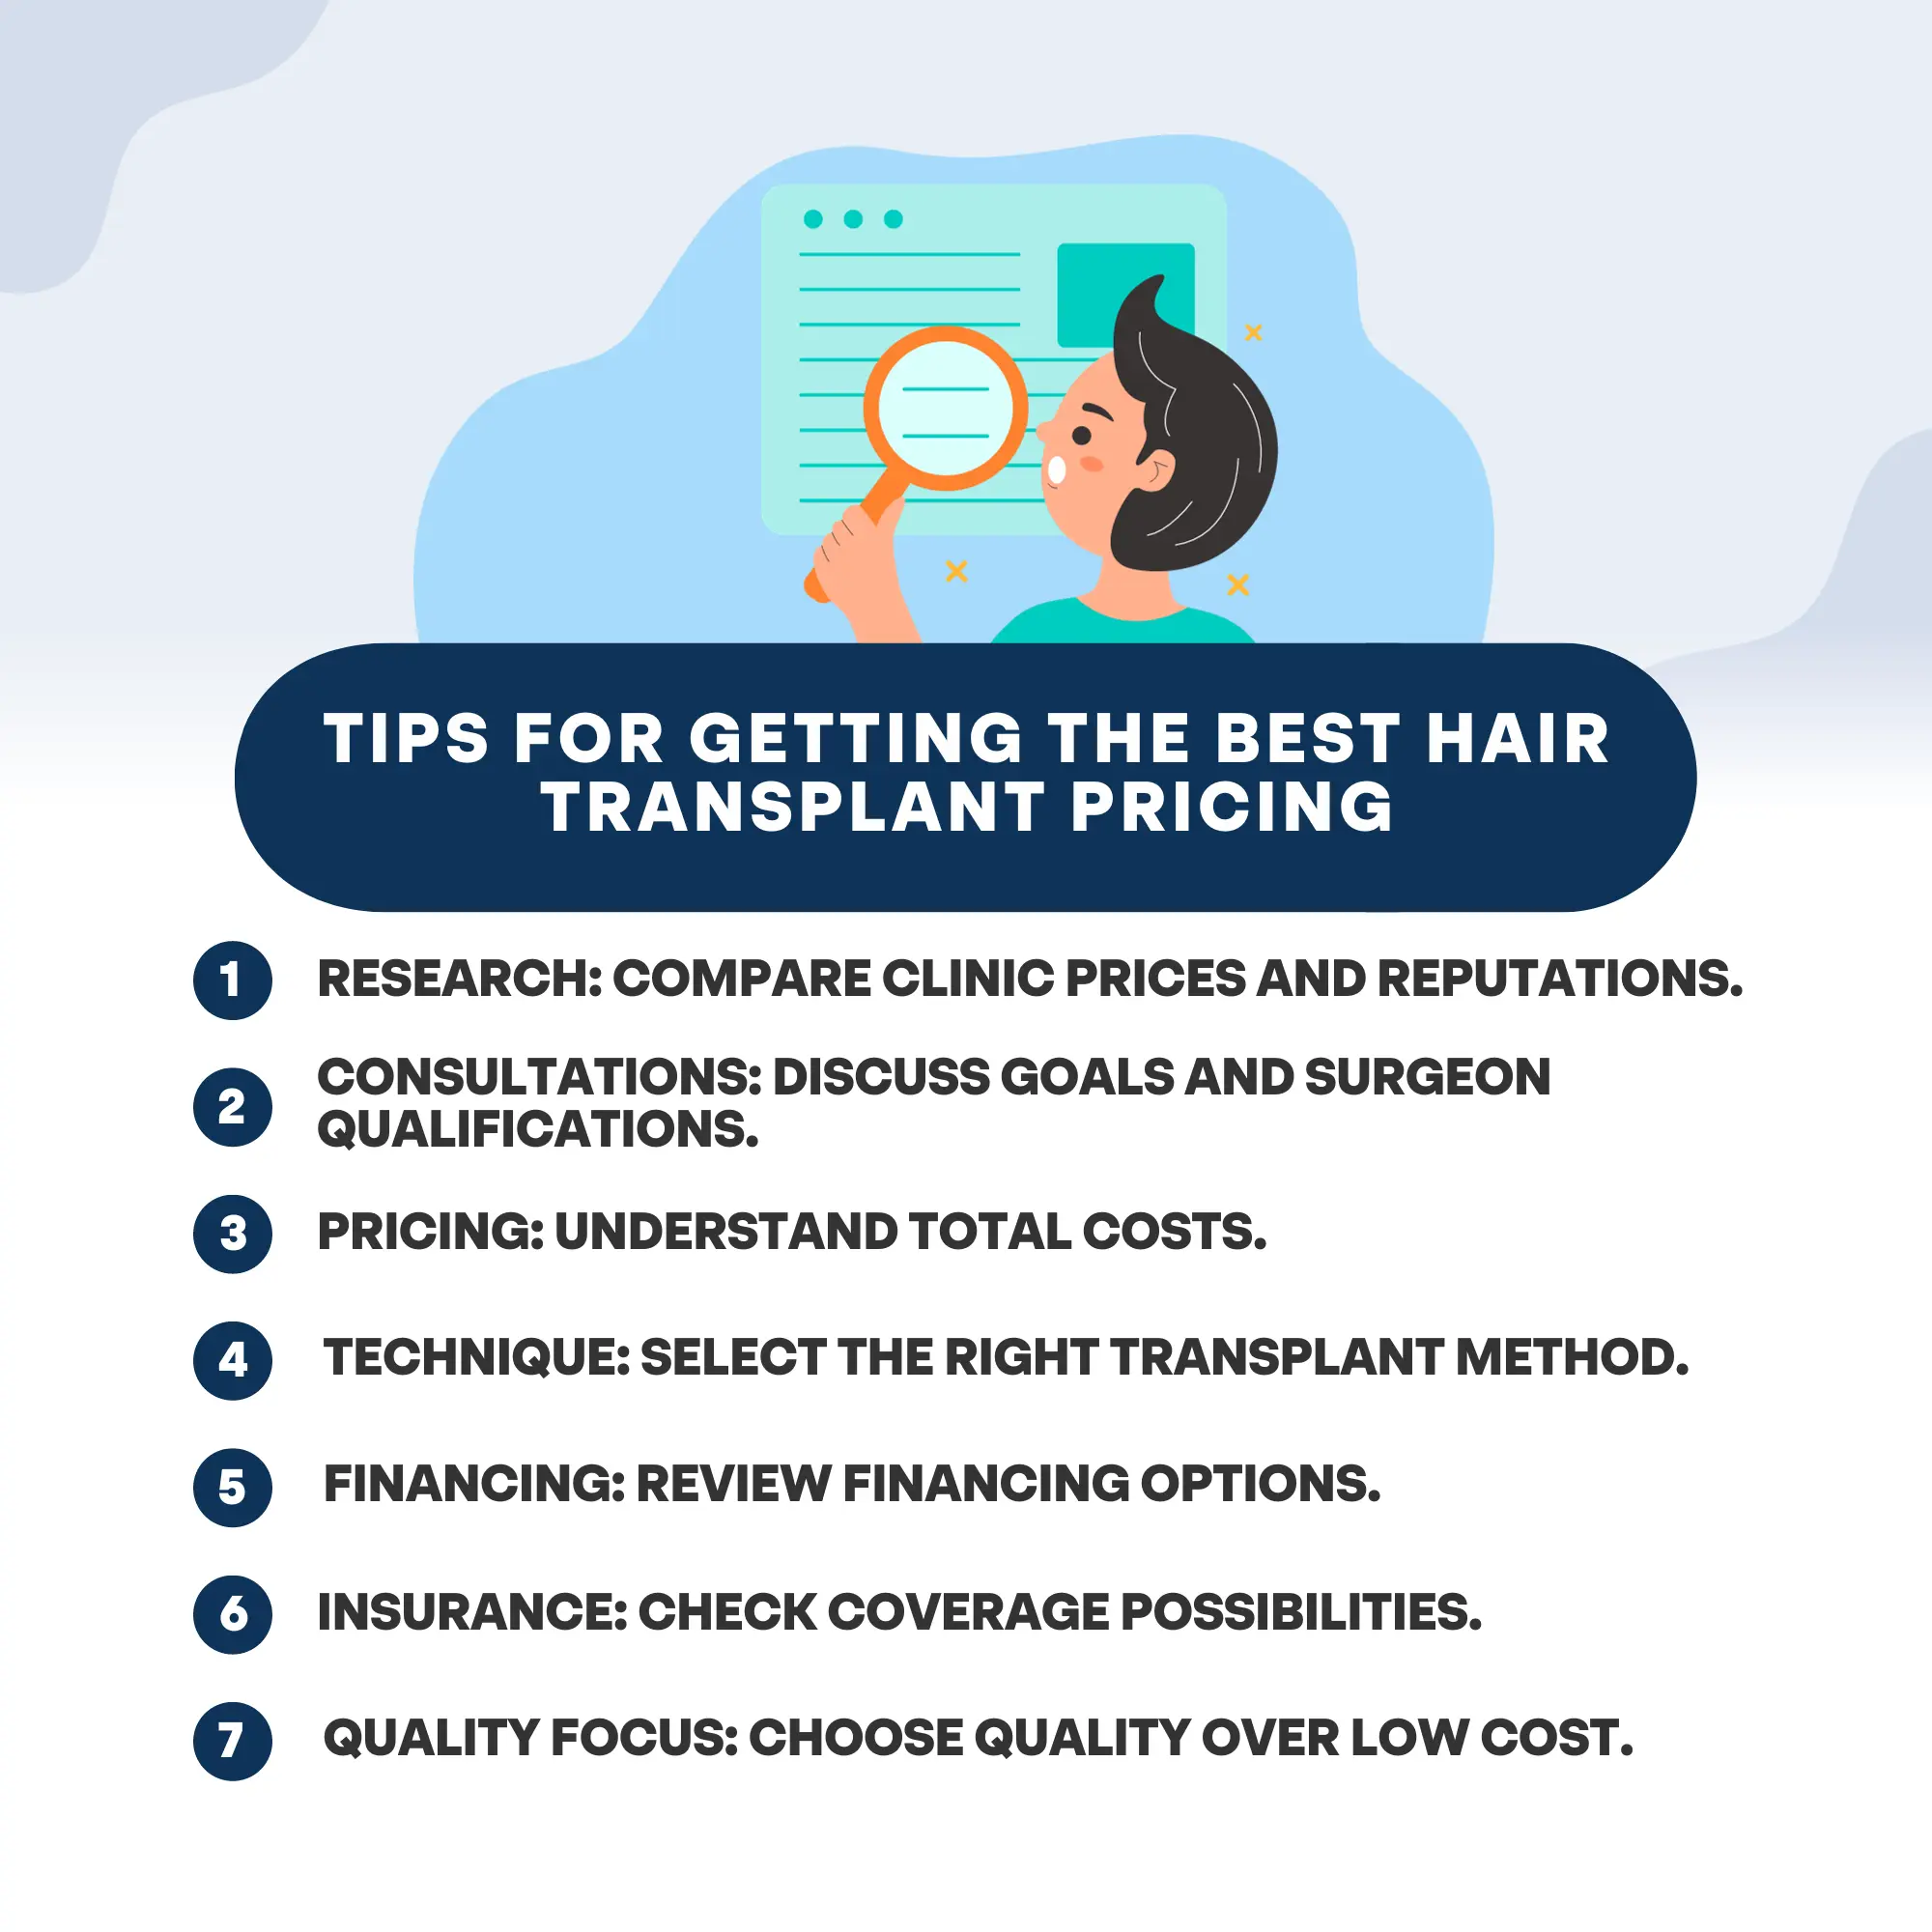 ips for Getting the Best Hair Transplant Pricing